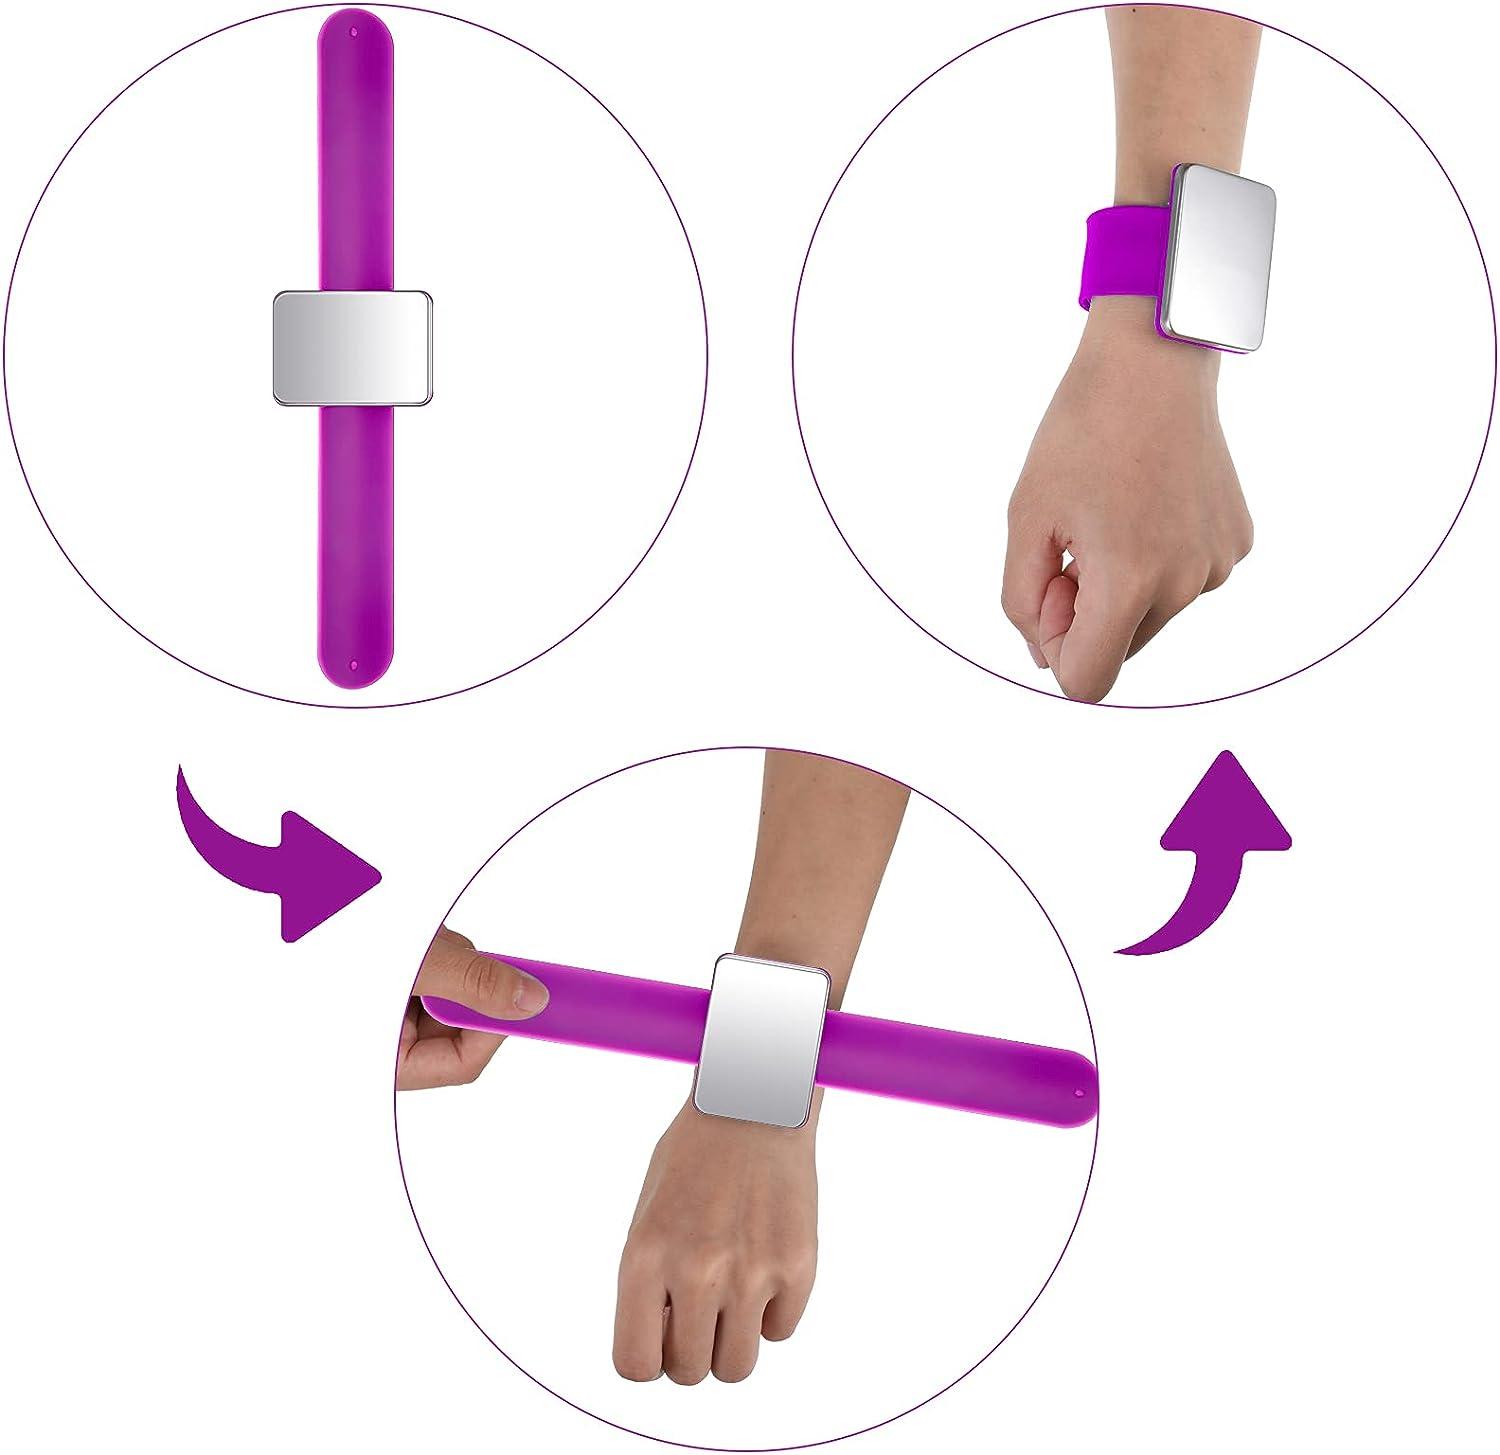 NOLITOY Wrist Bands Wrist Brace Bracelet Pin Holder Magnetic Pin Holder  with Wristband Gel Wrist Band for Braiding Hair Pat Ring Hairpin Needle Pad